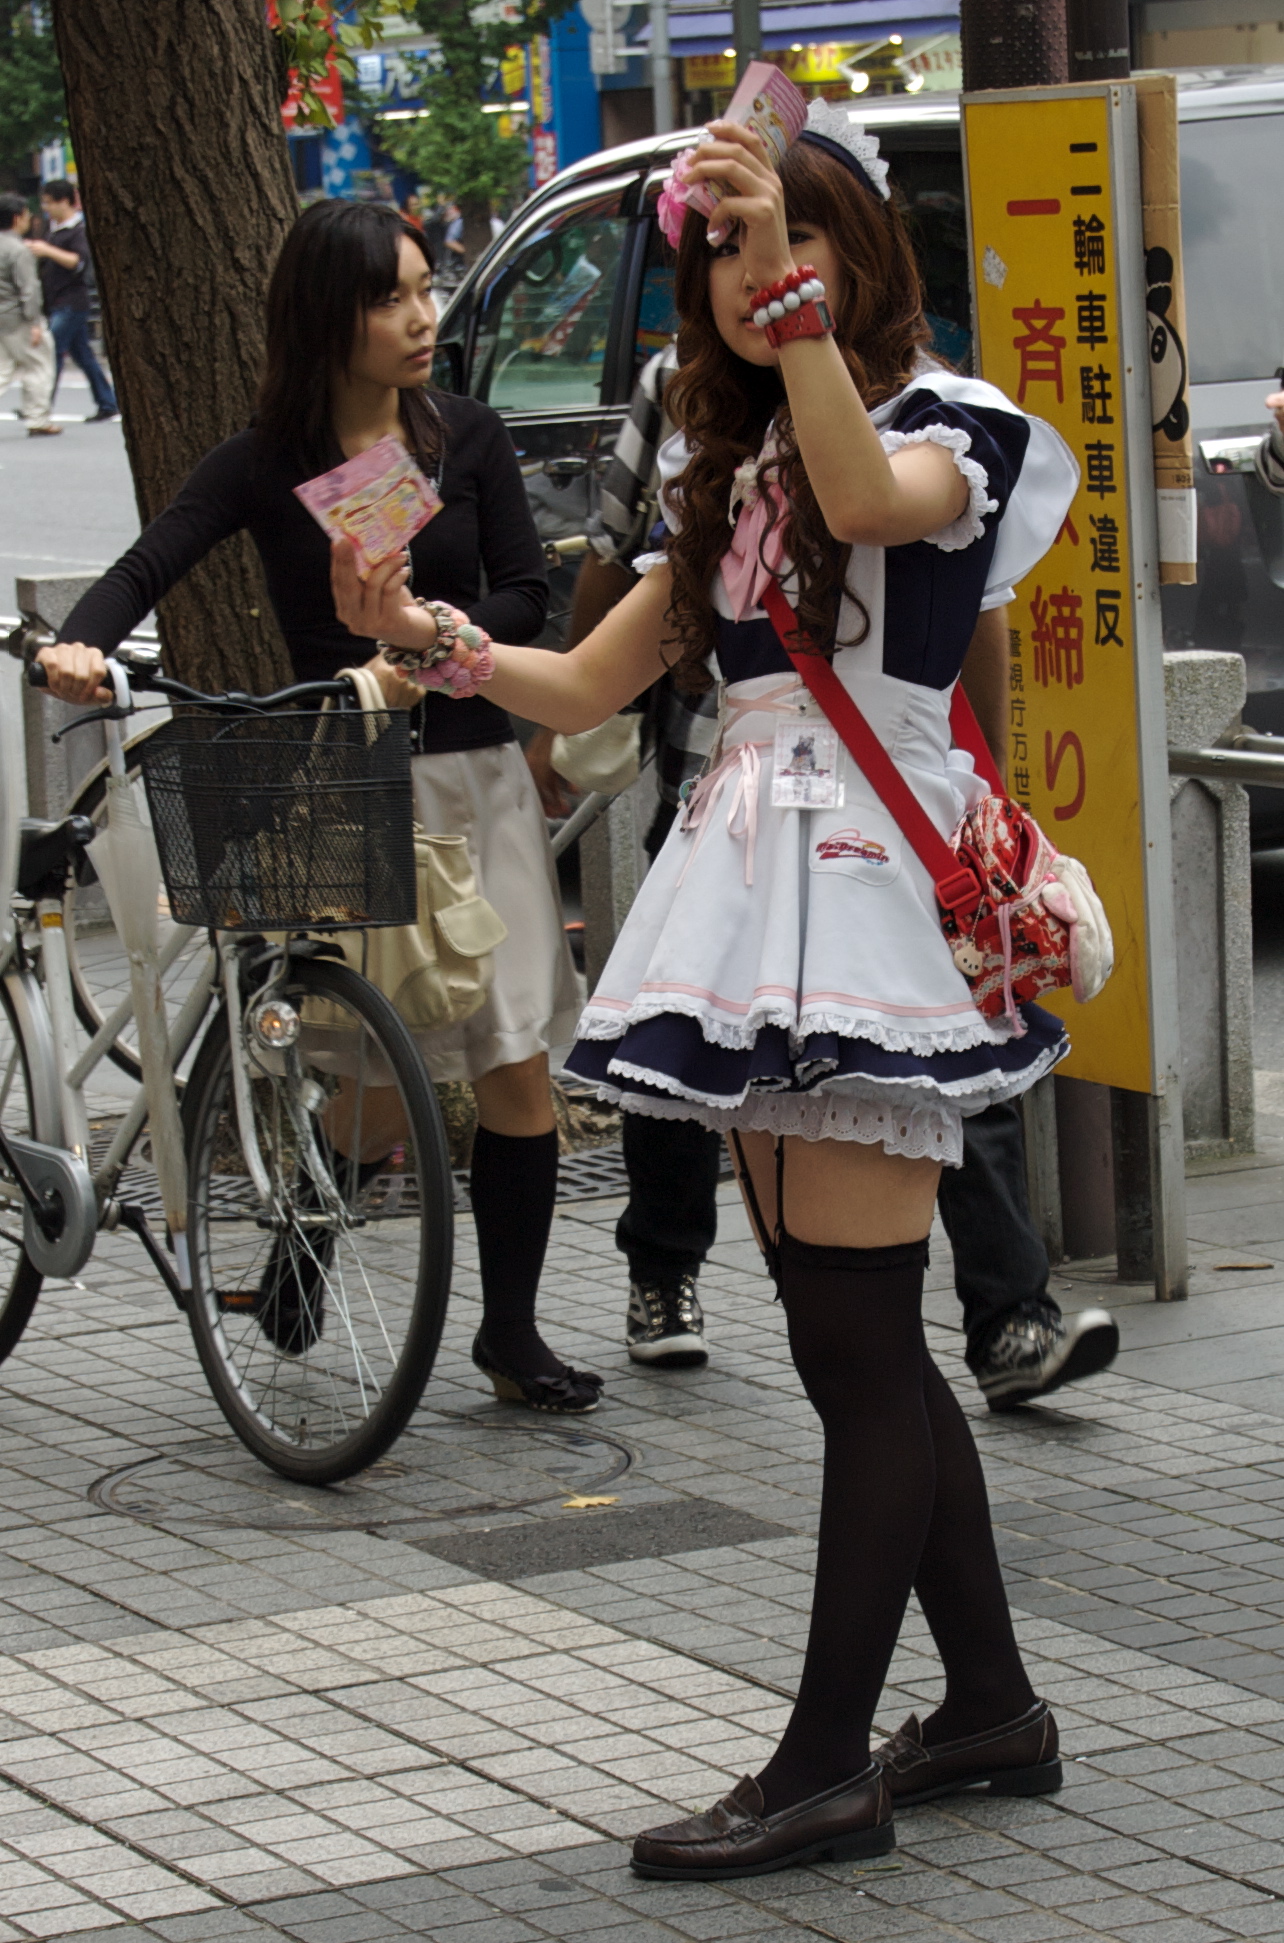 Maid in front of a maid cafe in Japan